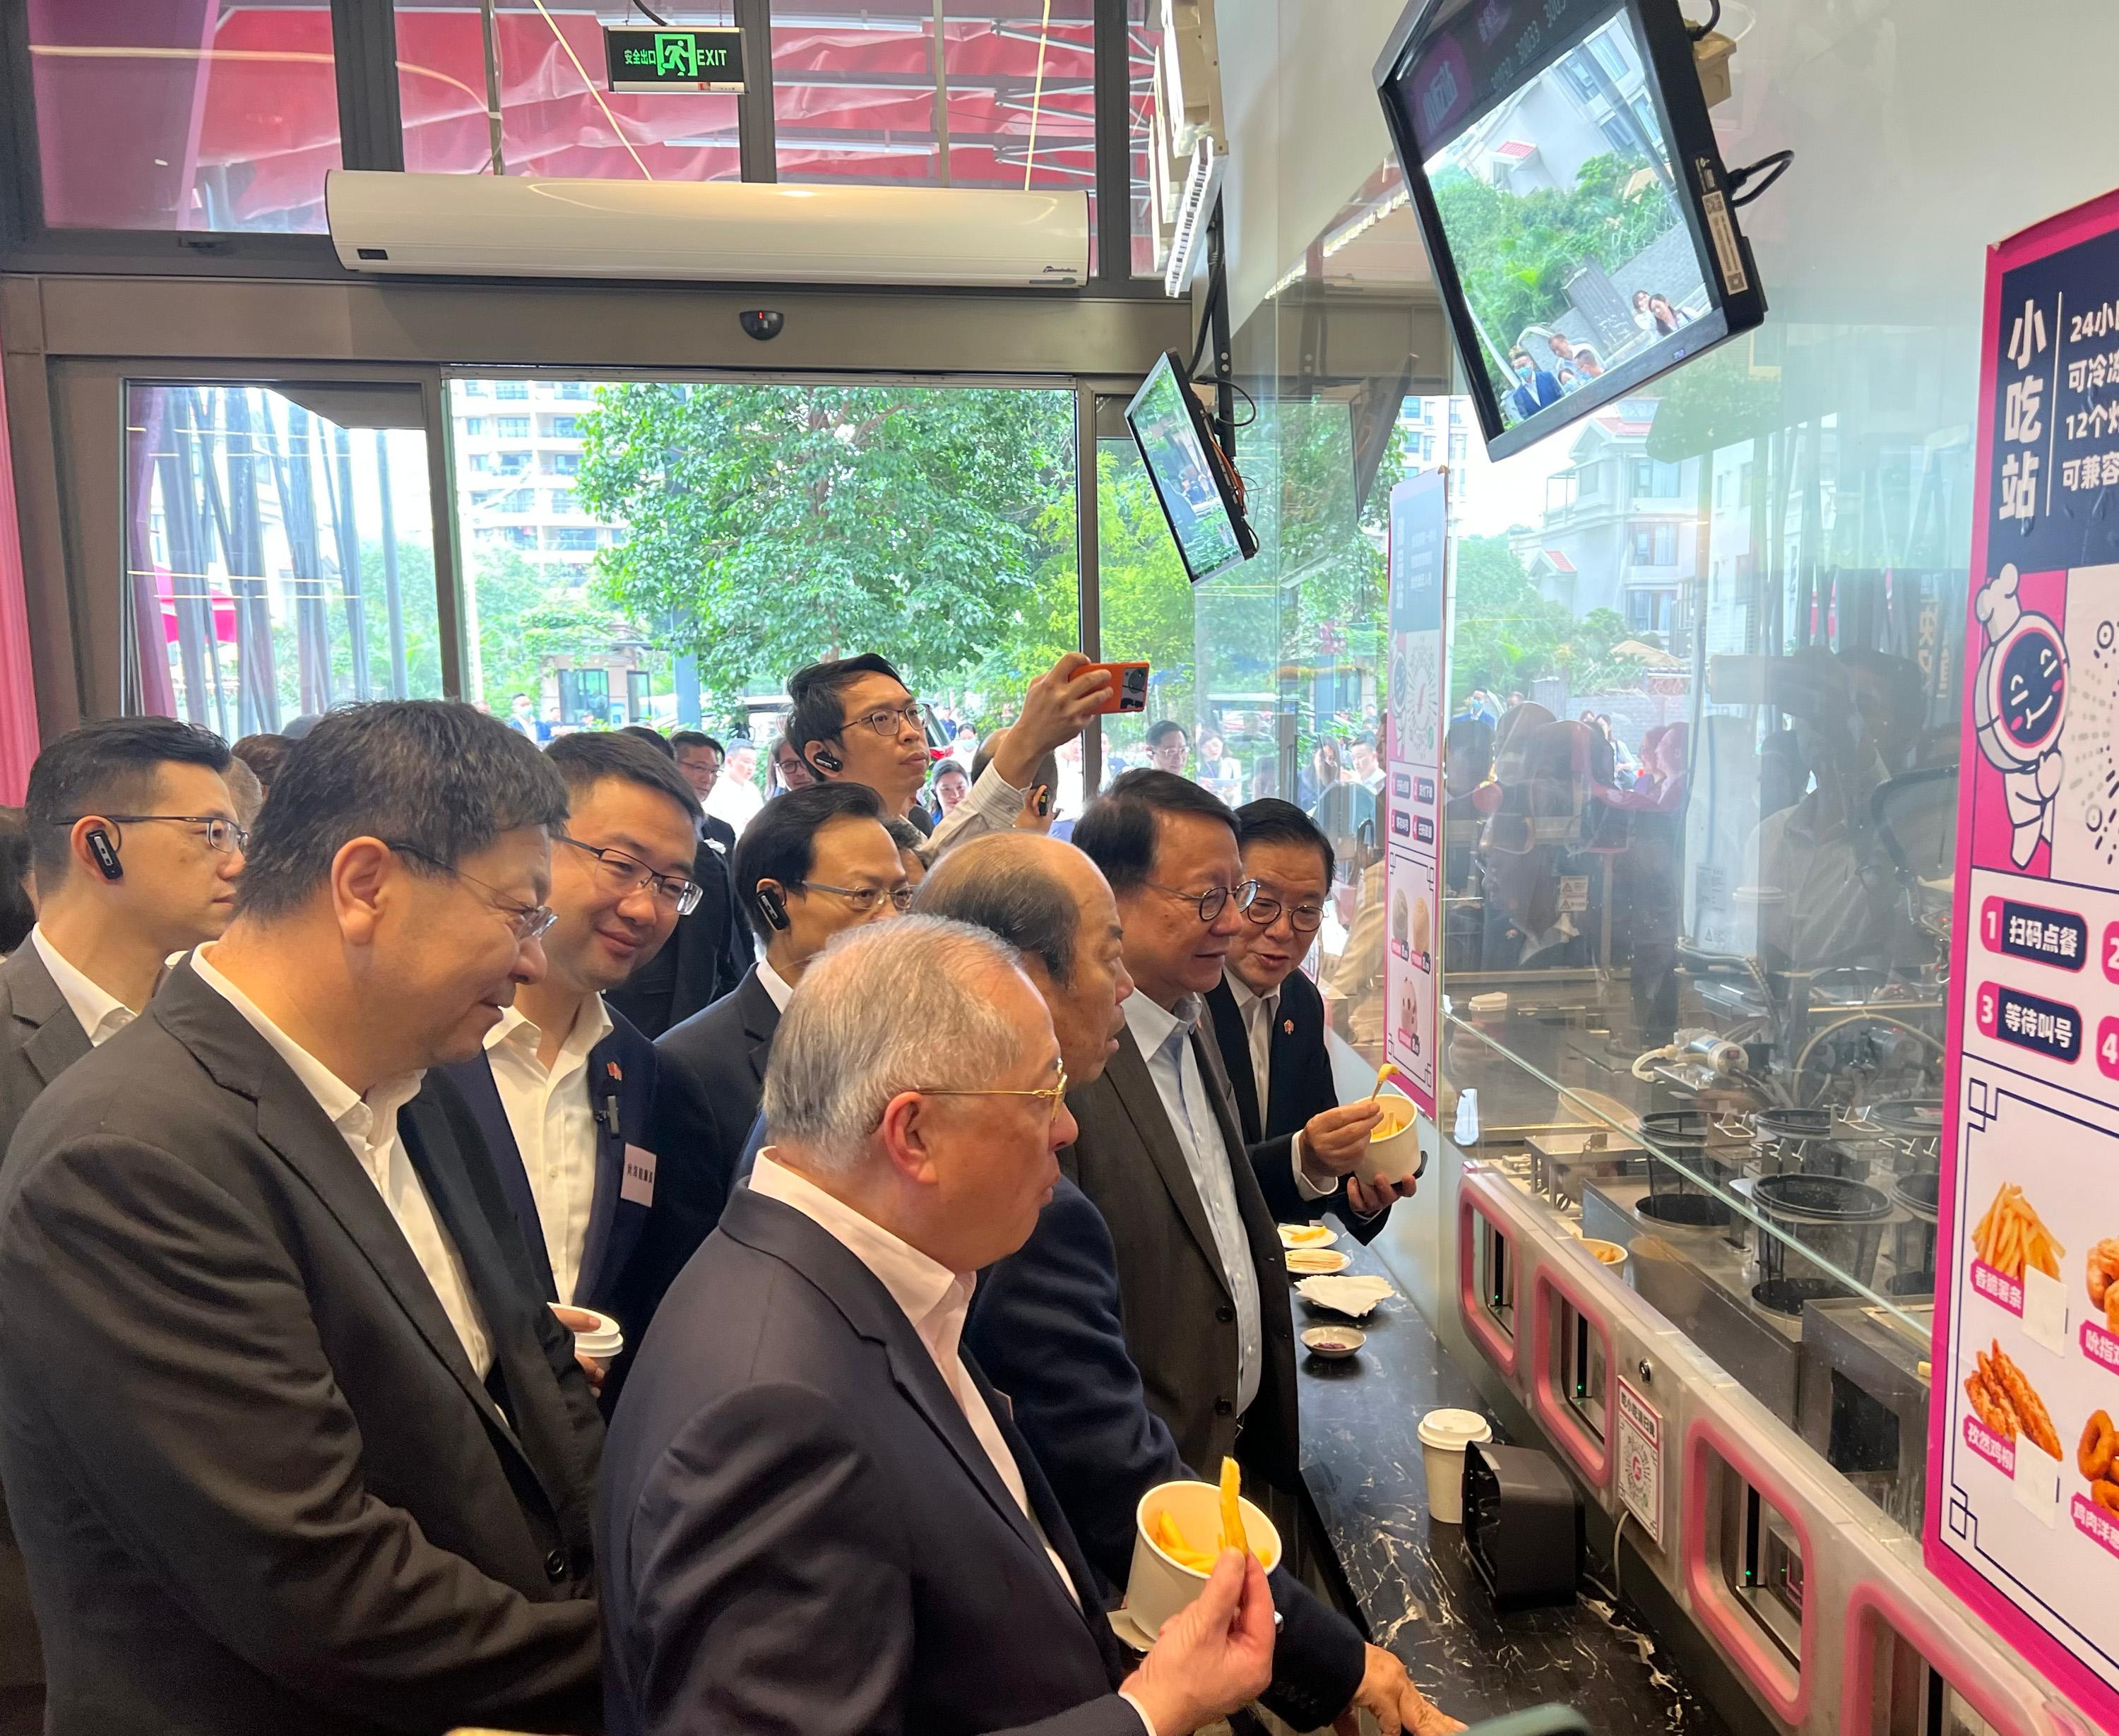 The delegation of the Hong Kong Special Administrative Region Government and the Legislative Council led by the Chief Executive, Mr John Lee, continues its duty visit in the Guangdong-Hong Kong-Macao Greater Bay Area today (April 23). The delegation visited Guangdong Bright Dream Robotics Co. Ltd. in Foshan, and learned about using robots to prepare food.